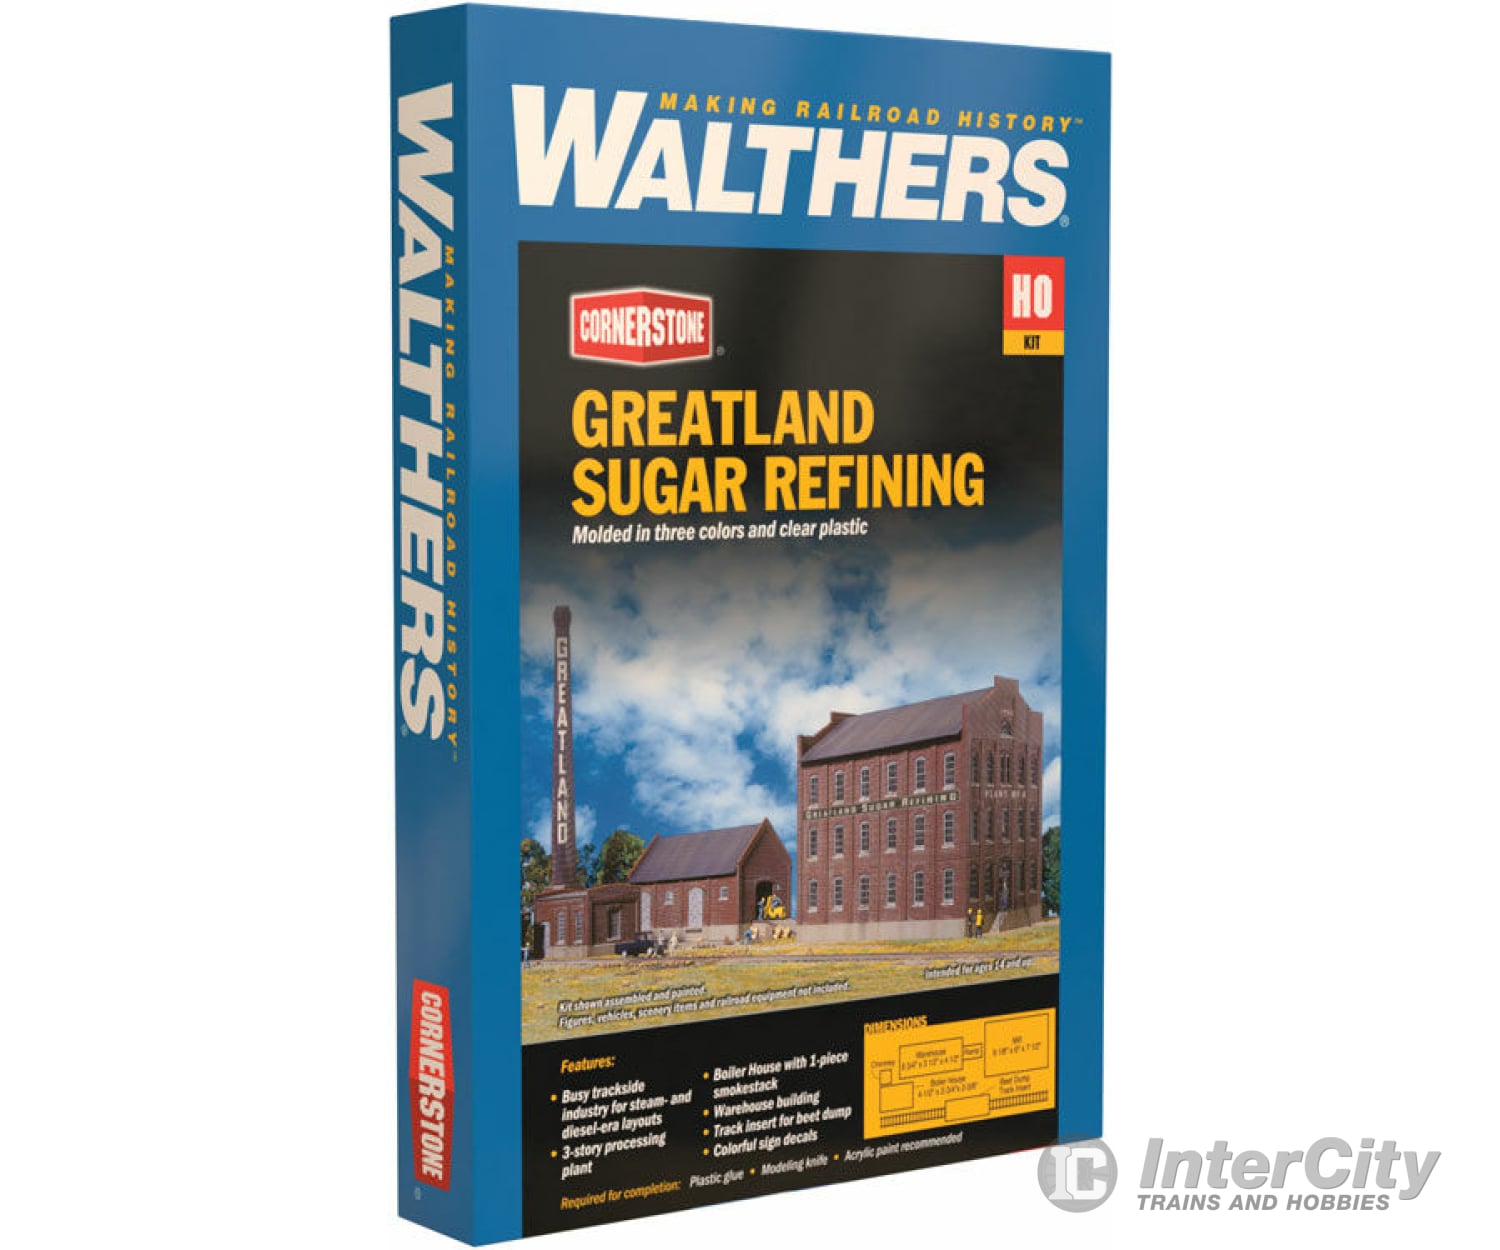 Walthers Cornerstone Ho 3092 Greatland Sugar Refining -- Kit Structures